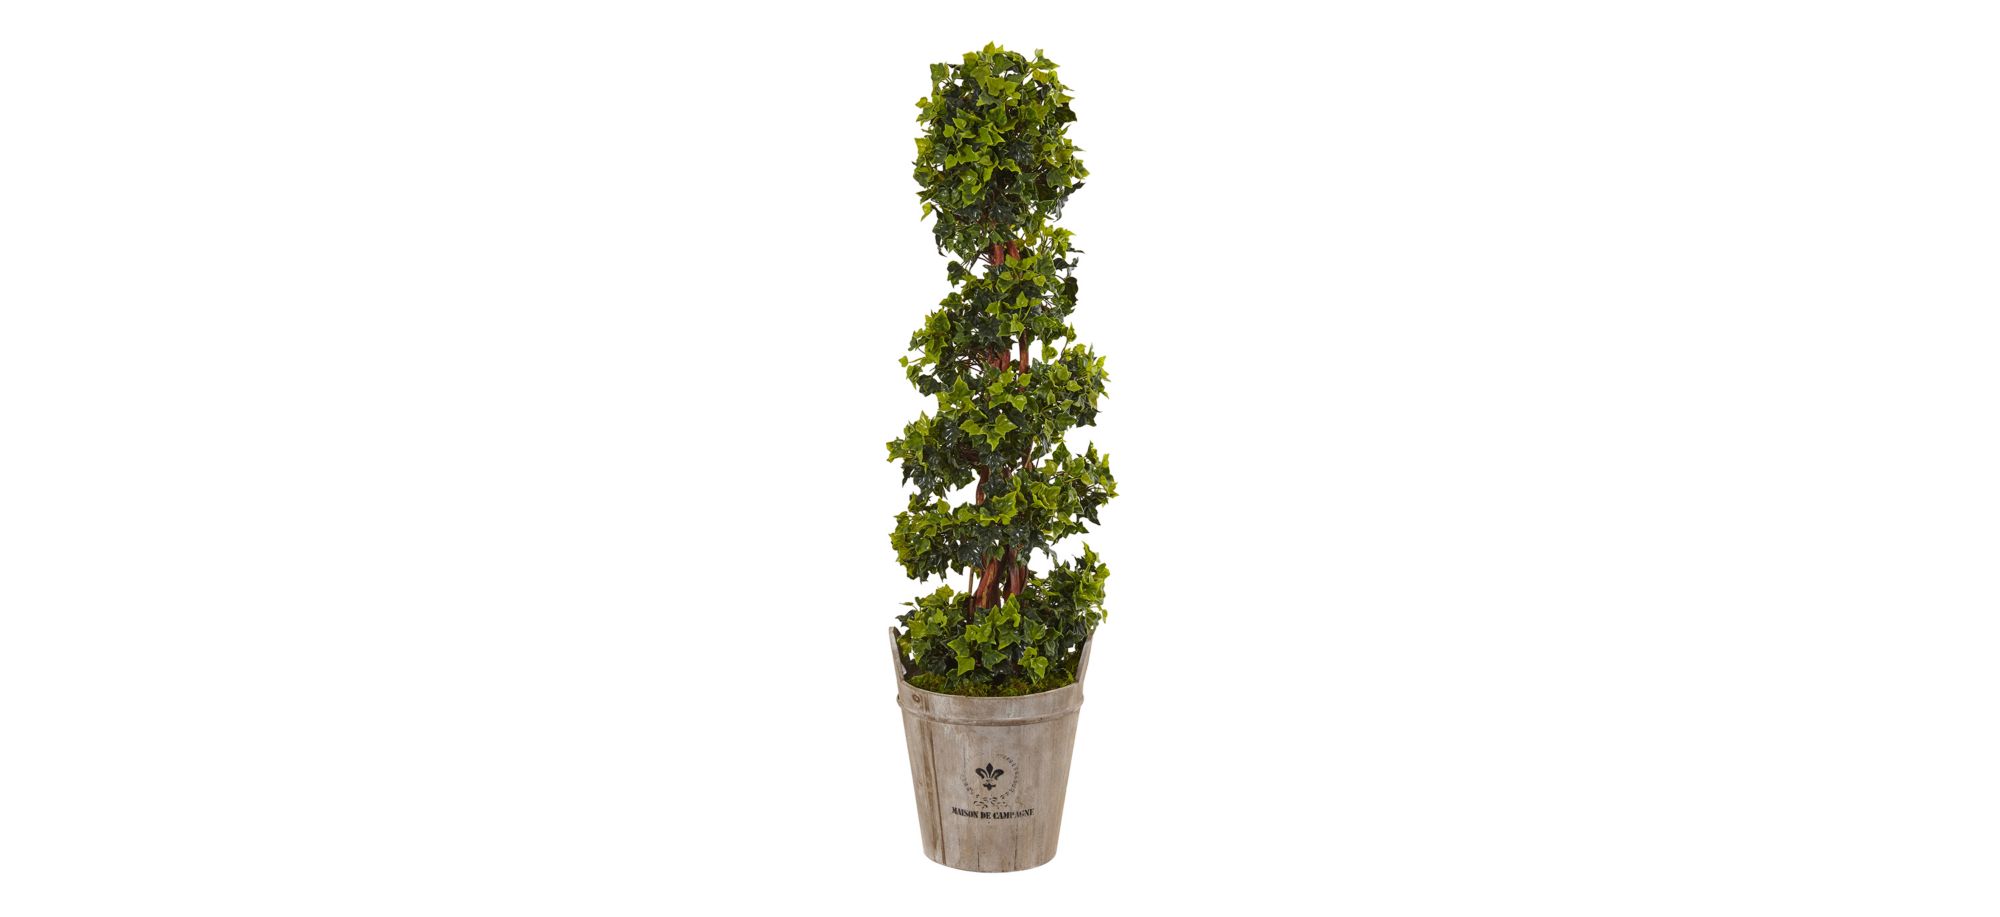 4ft. English Ivy Artificial Tree in Farmhouse Planter (Indoor/Outdoor) in Green by Bellanest